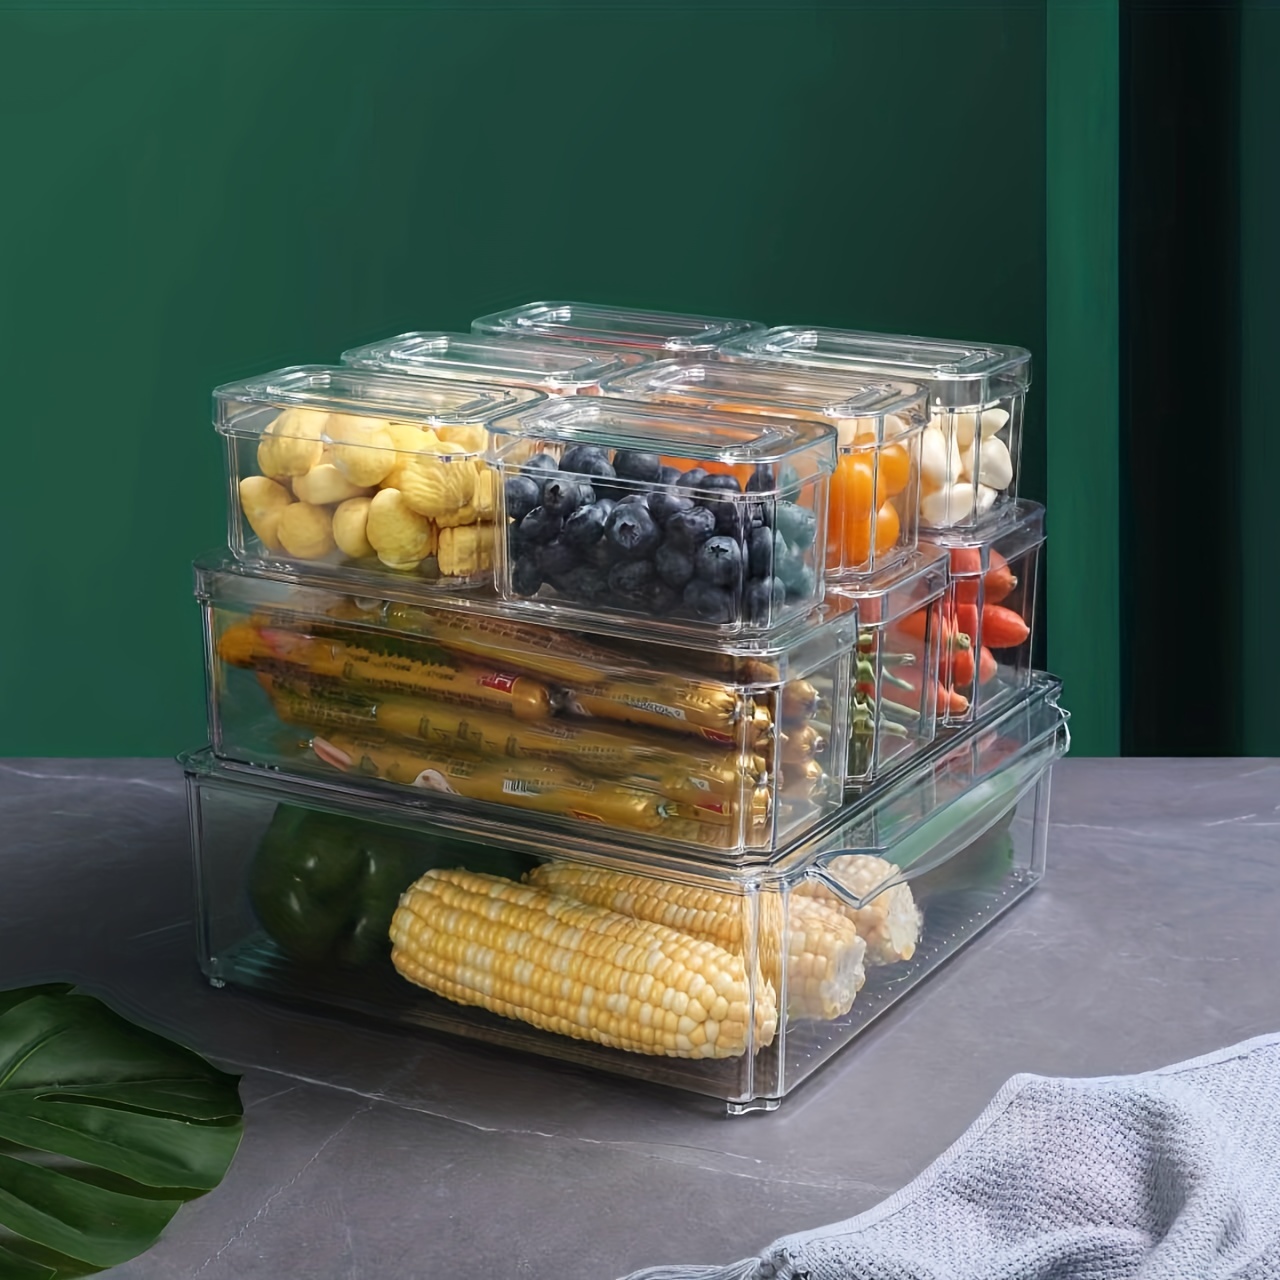 Fresh Food Storage Containers Fridge Storage Container 0.45 L Keep